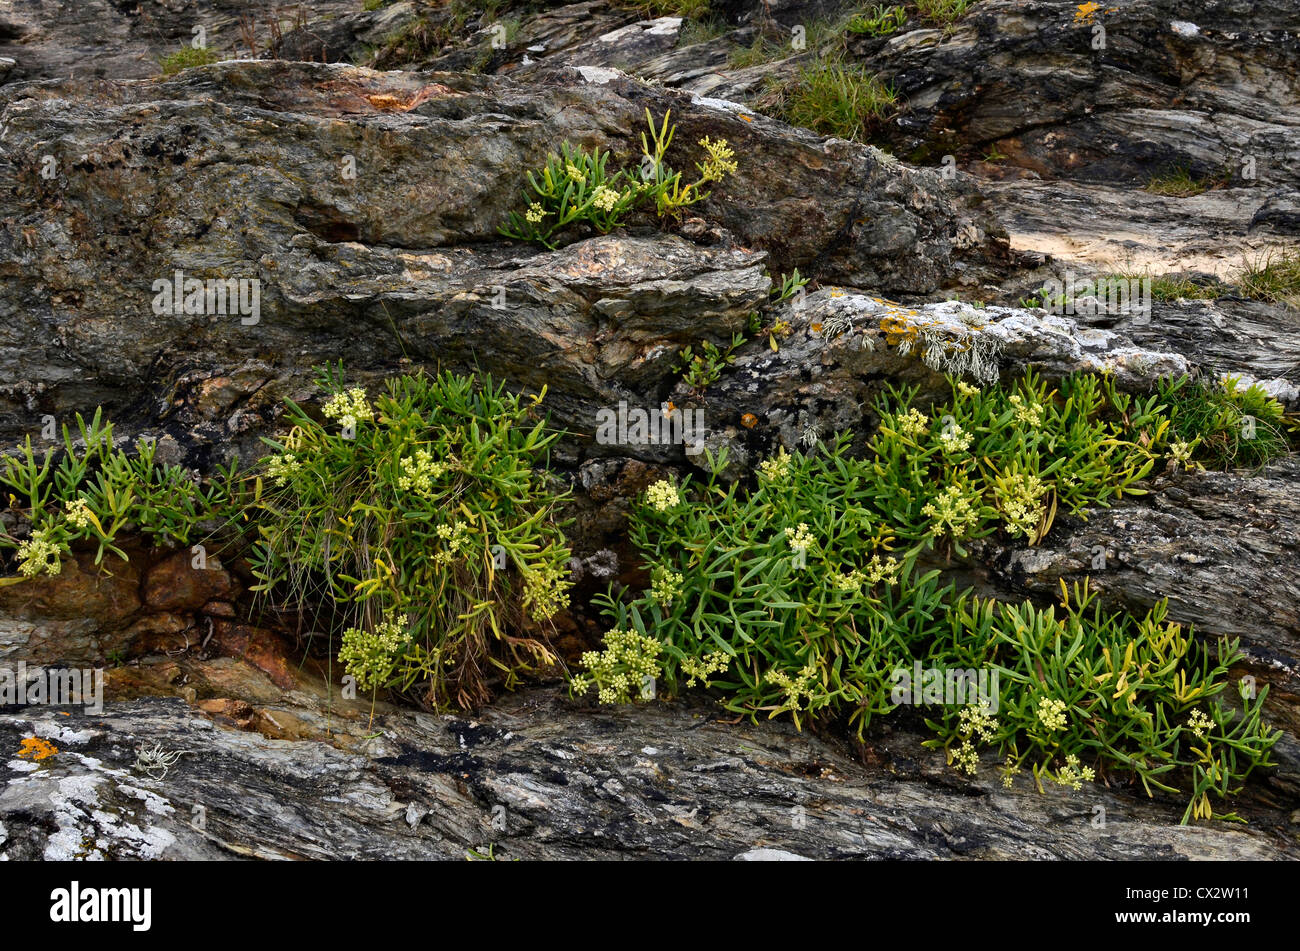 Foliage and flowers of Rock Samphire / Crithmum maritimum. Foraging and dining on the wild concept. Stock Photo